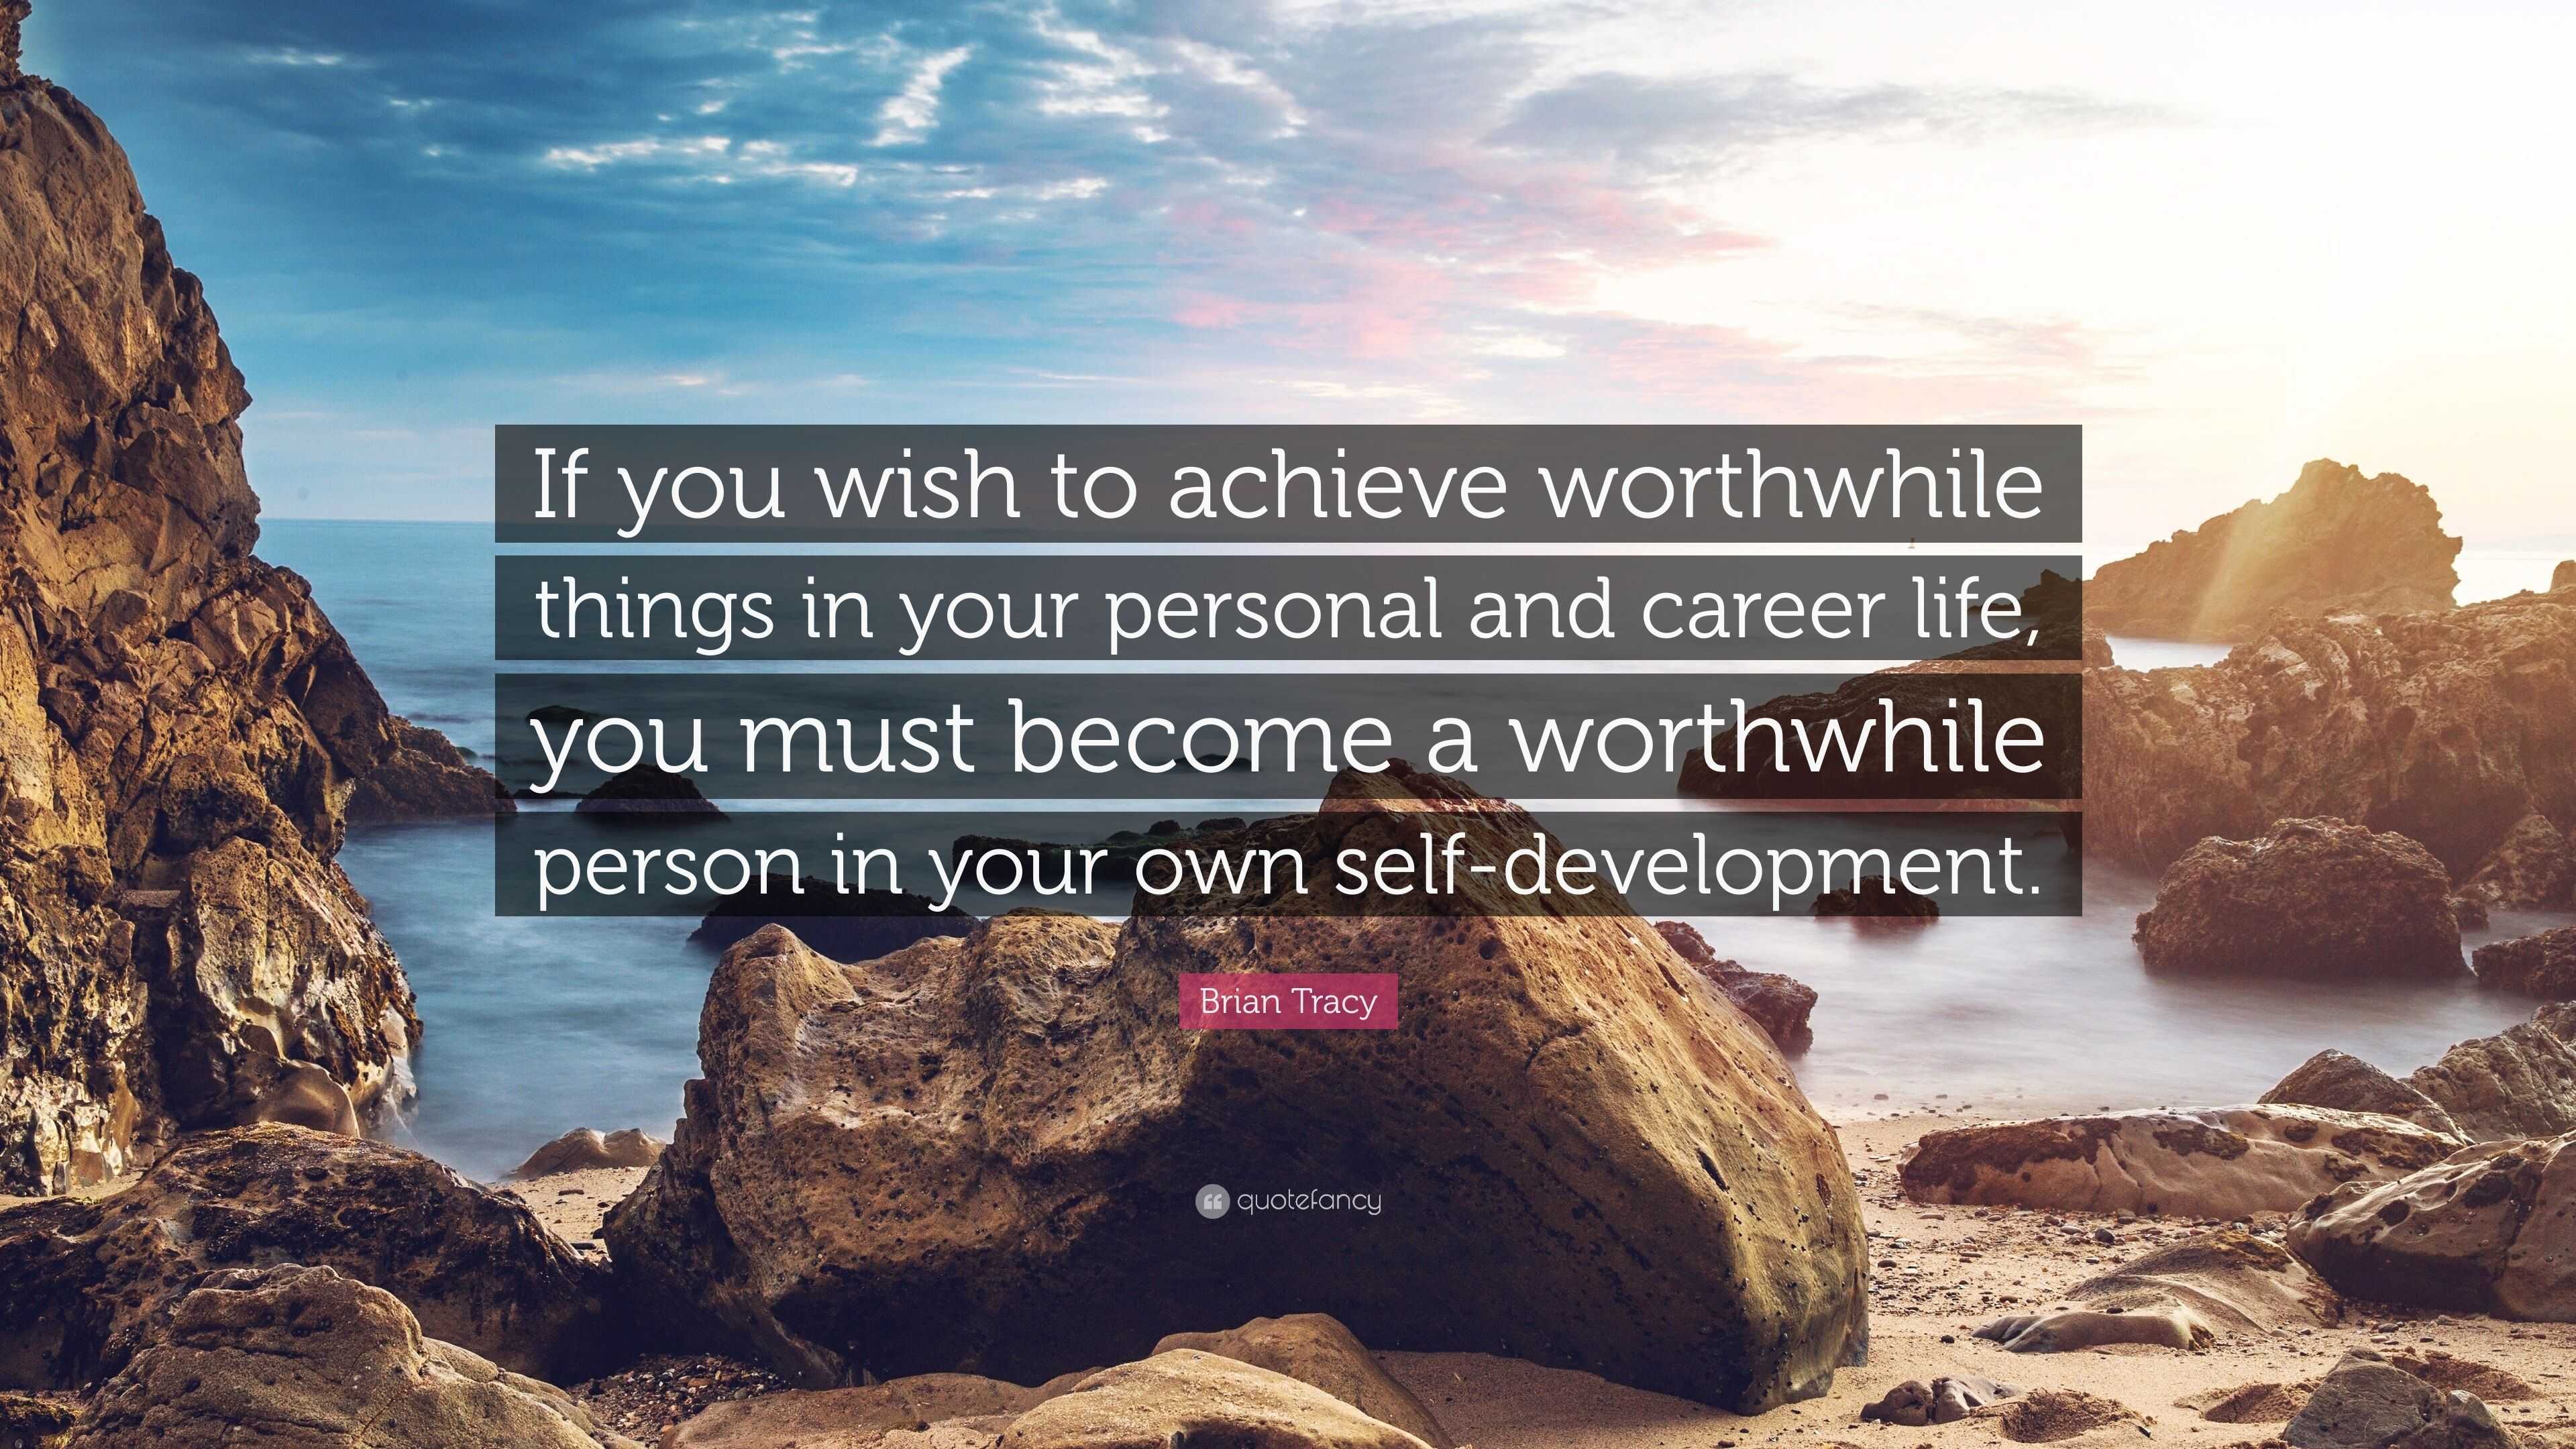 Brian Tracy Quote “if You Wish To Achieve Worthwhile Things In Your Personal And Career Life